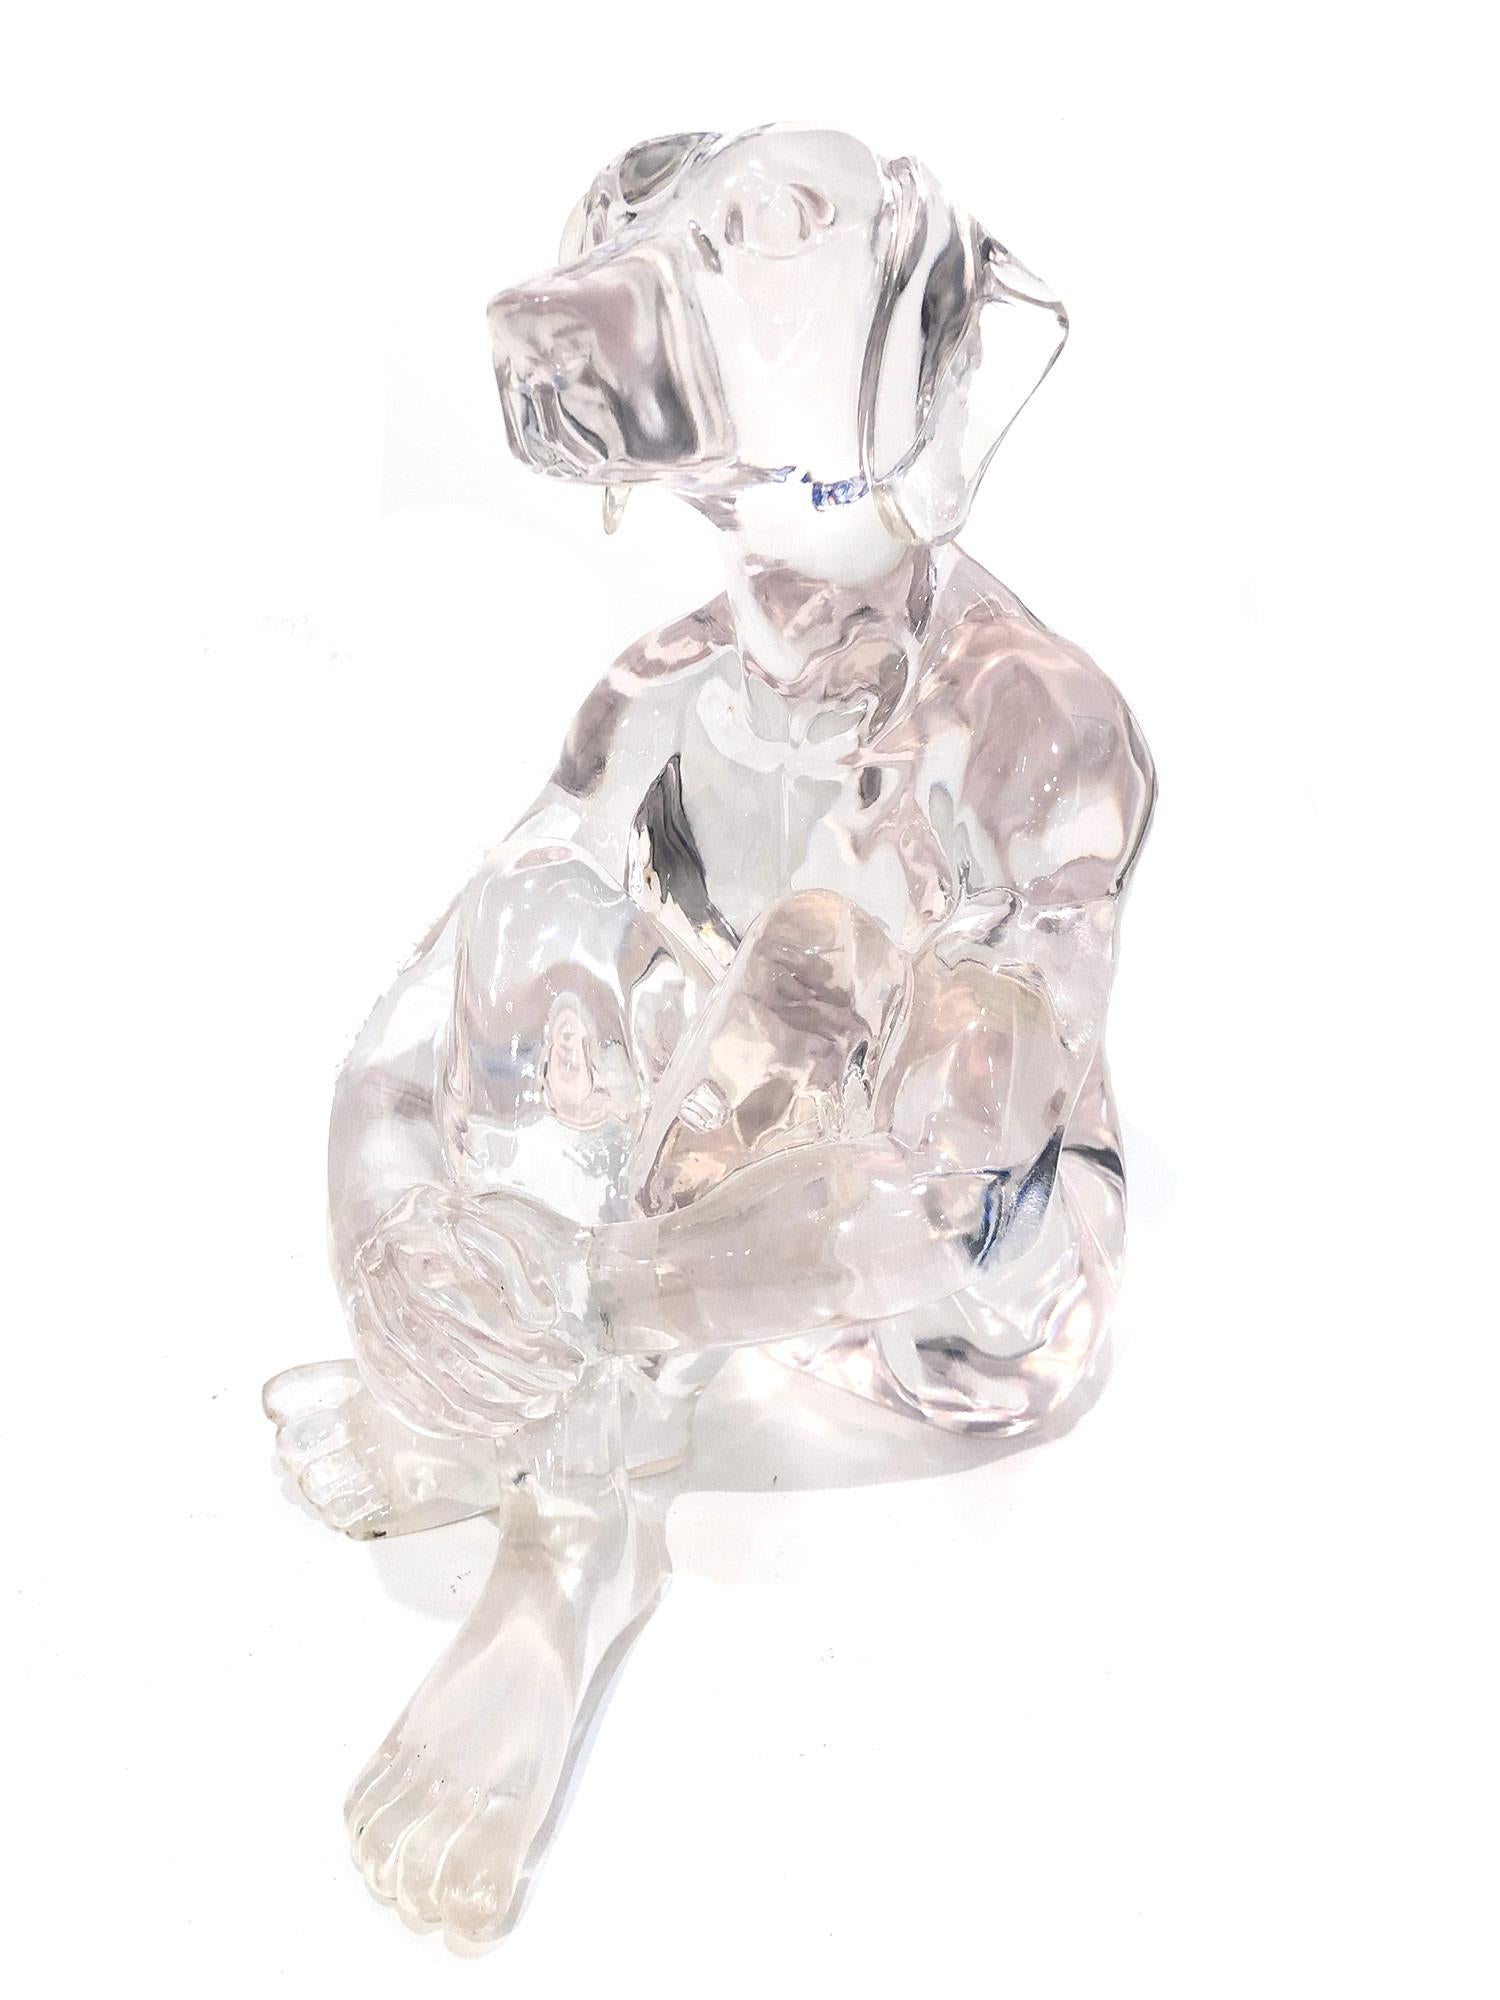 "Lolly Dogman (Clear)" Pop Art Clear Polyresin Sculpture of Dogman Sitting Down